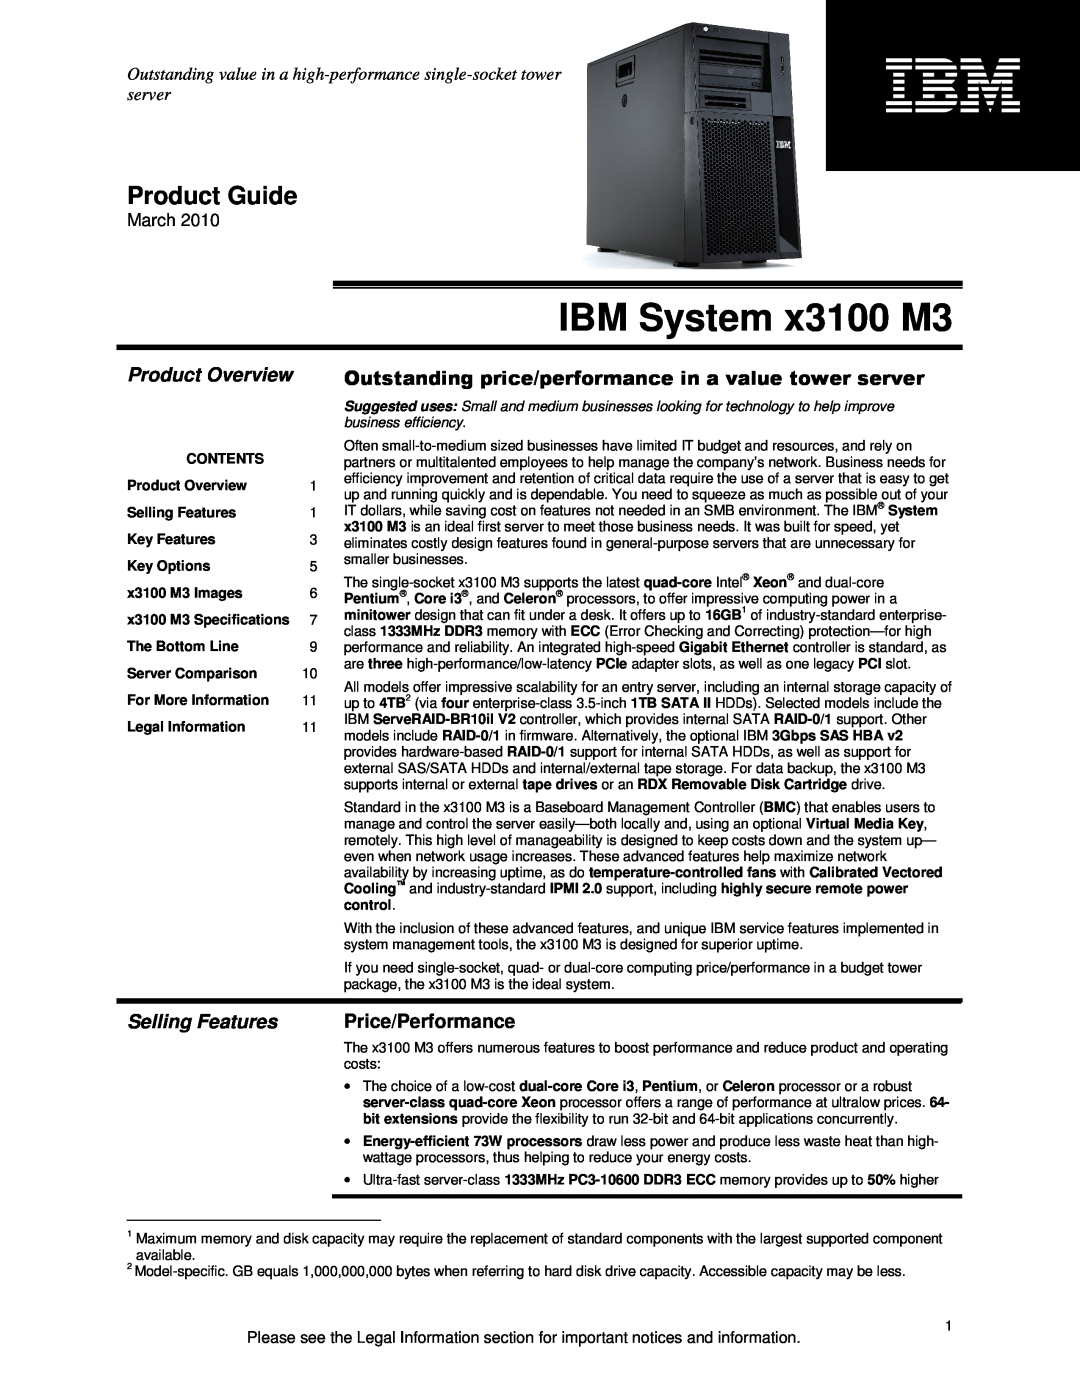 IBM X3100 M3 specifications Product Overview, Selling Features, Price/Performance, IBM System x3100 M3, Product Guide 